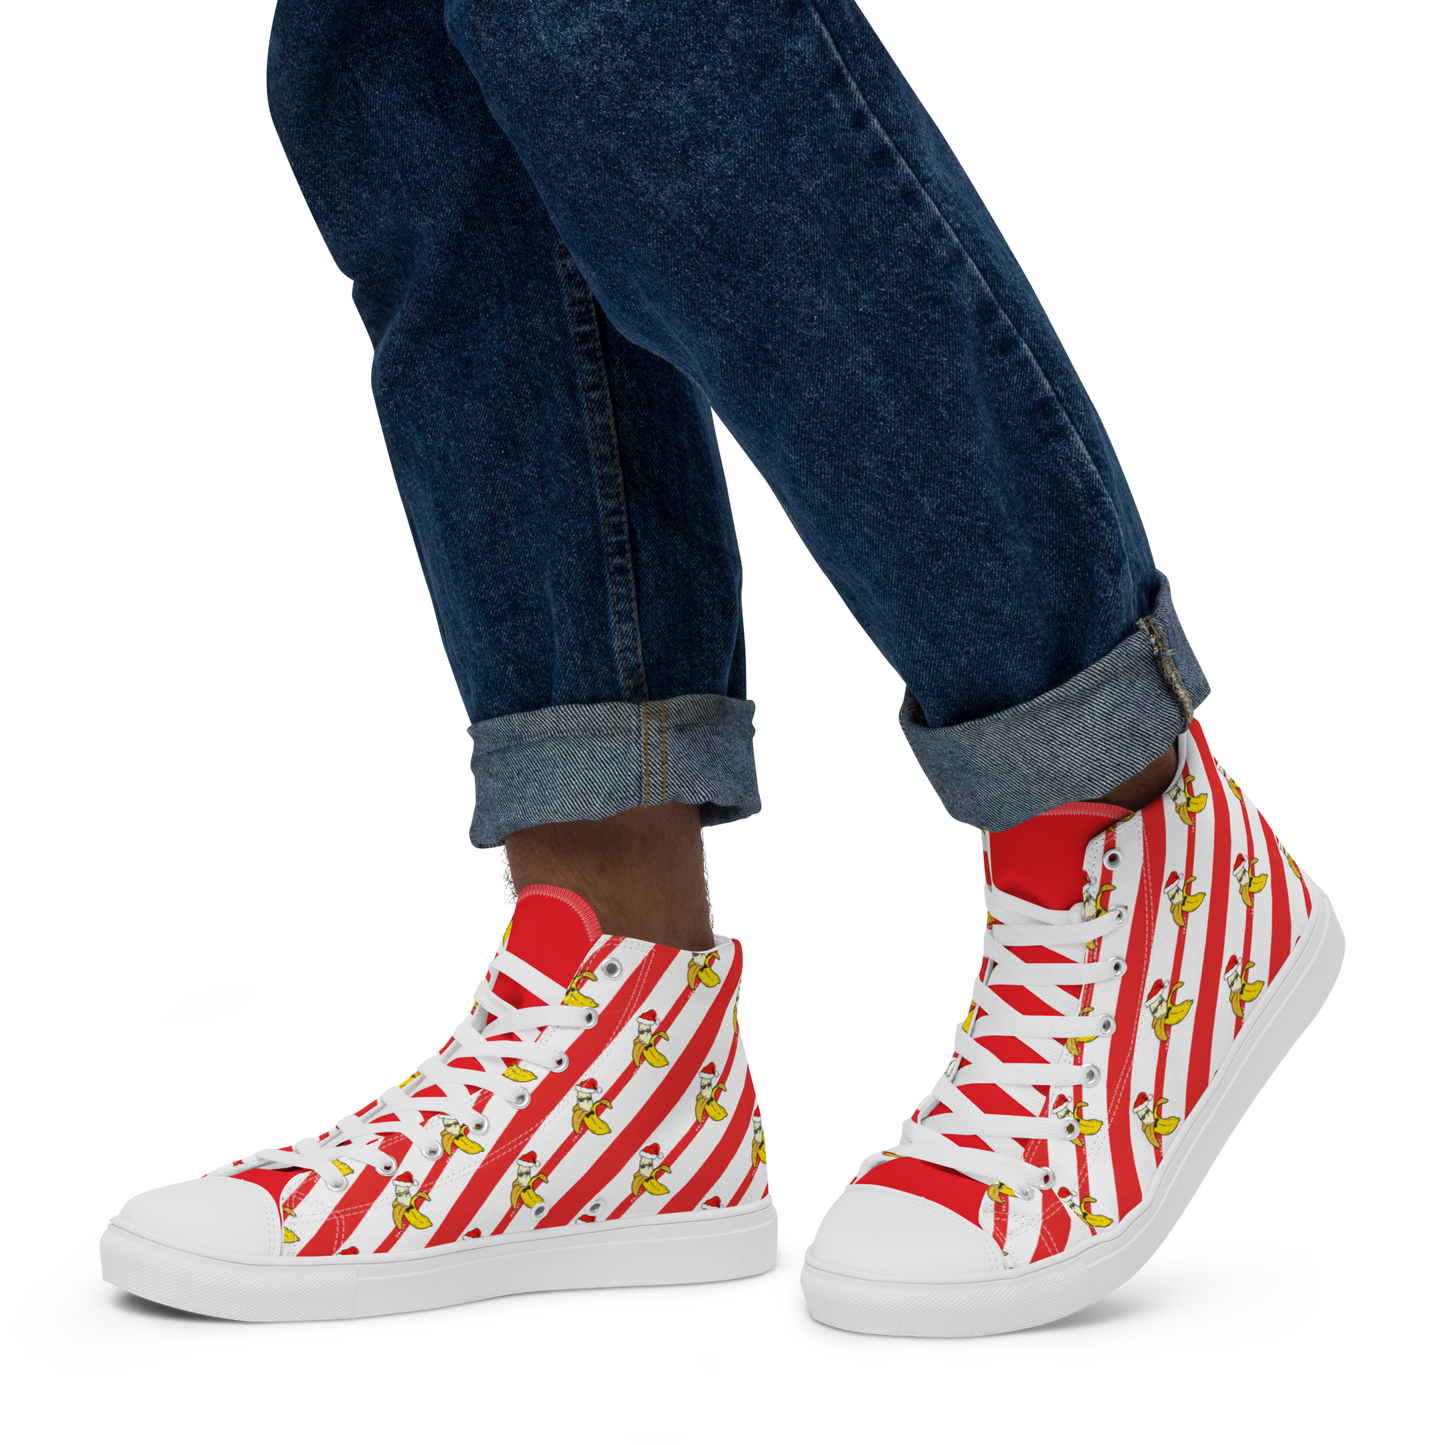 Candy Cane Men’s high top canvas shoes